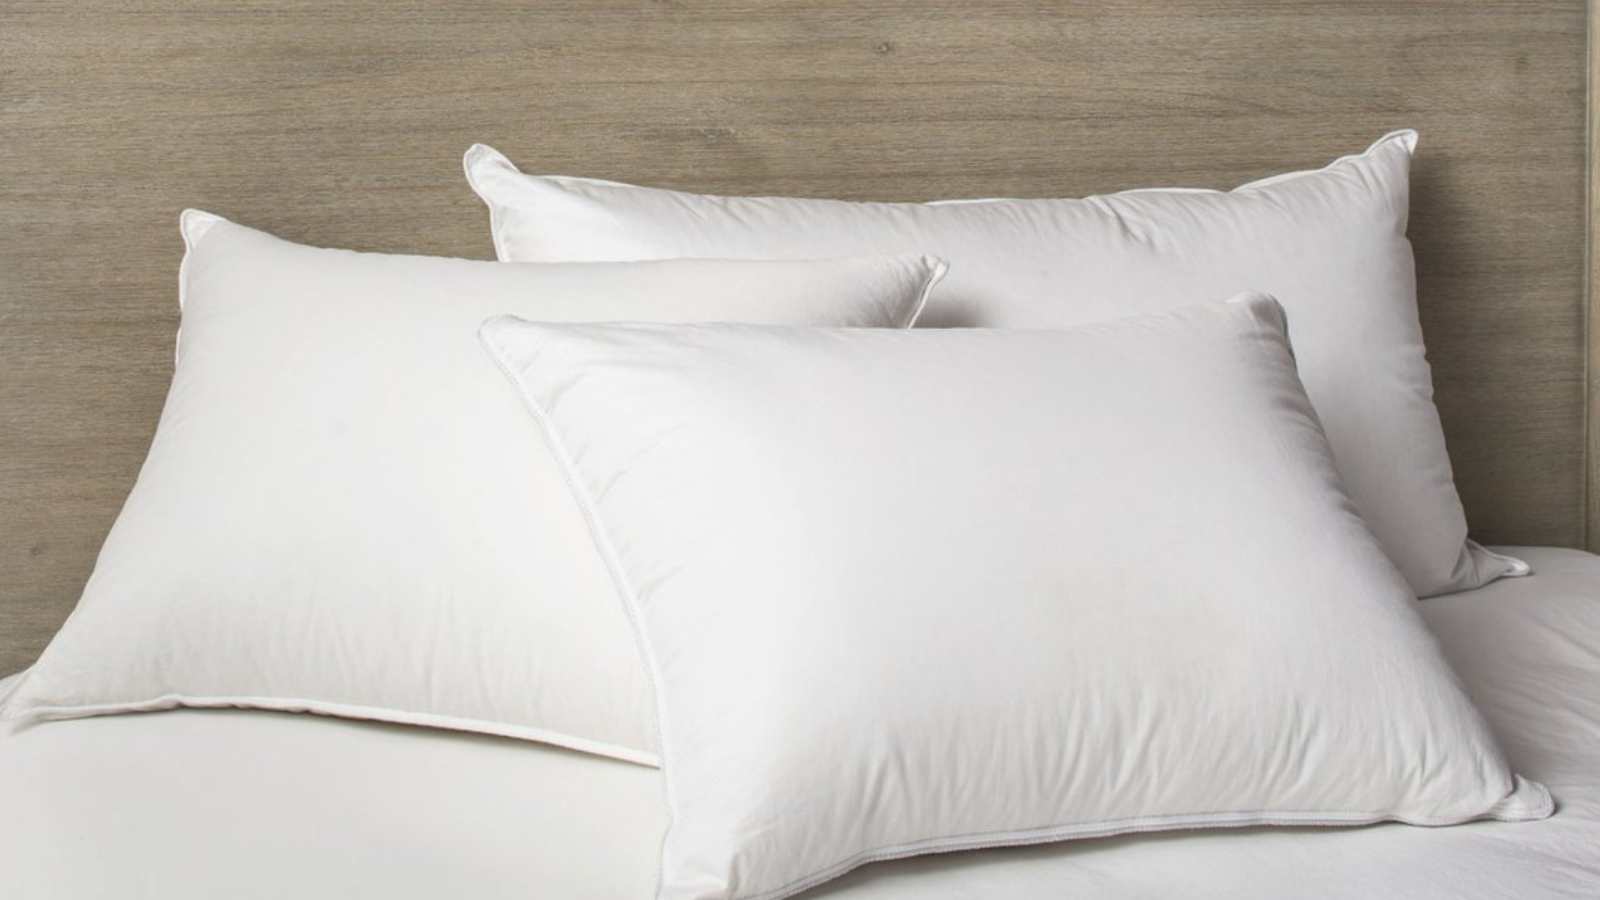 The best bed pillows of 2019: Xtreme 